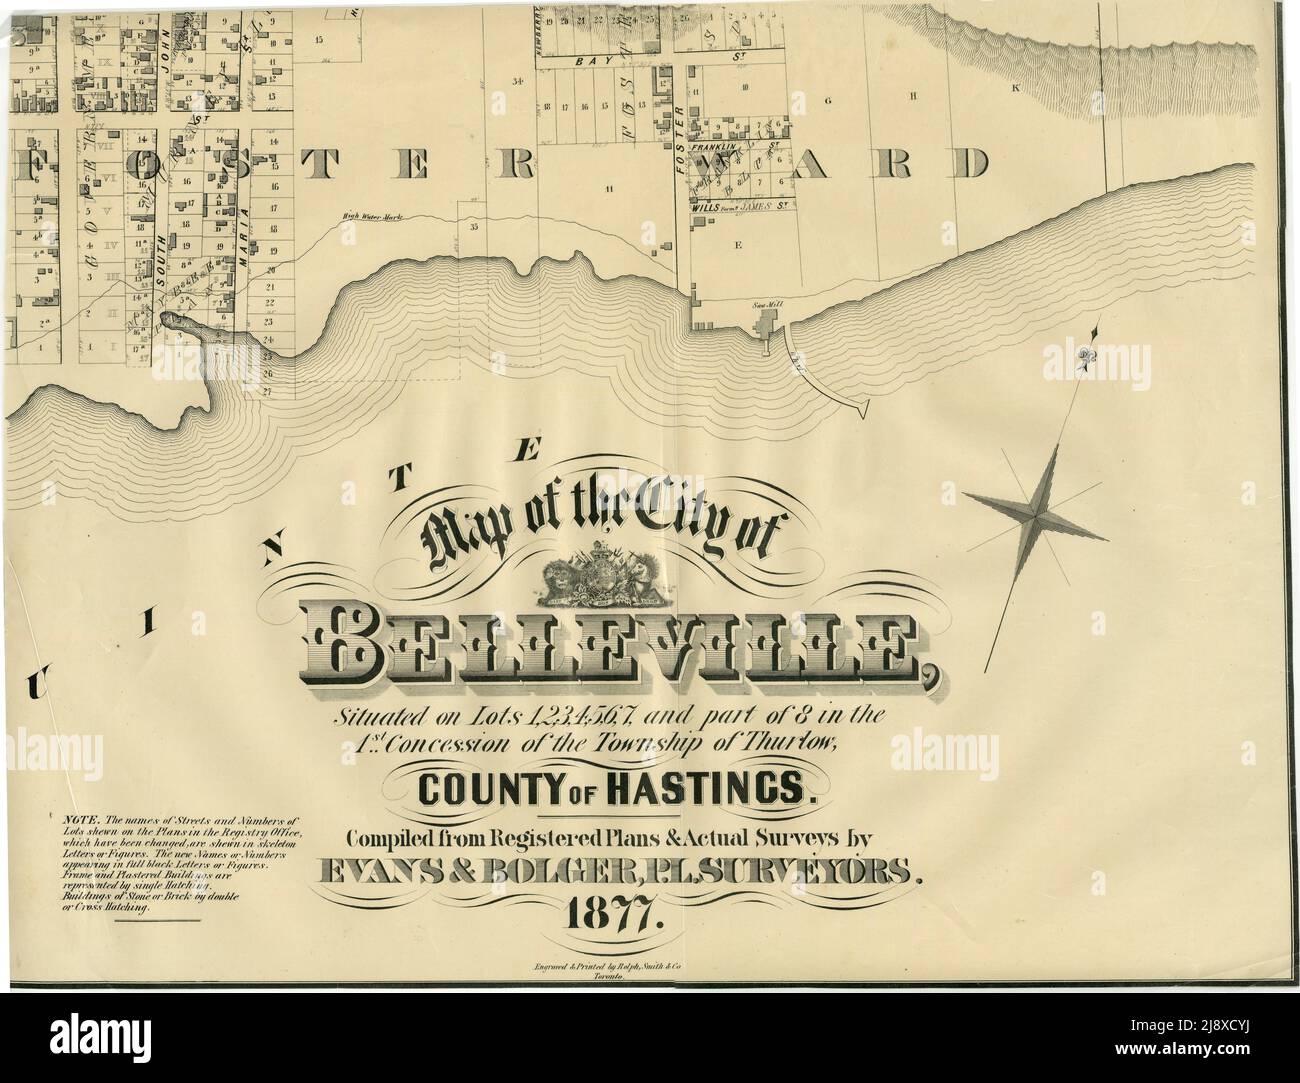 Part of the 1877 Map of the City of Belleville, Township of Thurlow, County of Hastings, Ontario, by Evans & Bolger, surveyors  ca.  1877 Stock Photo